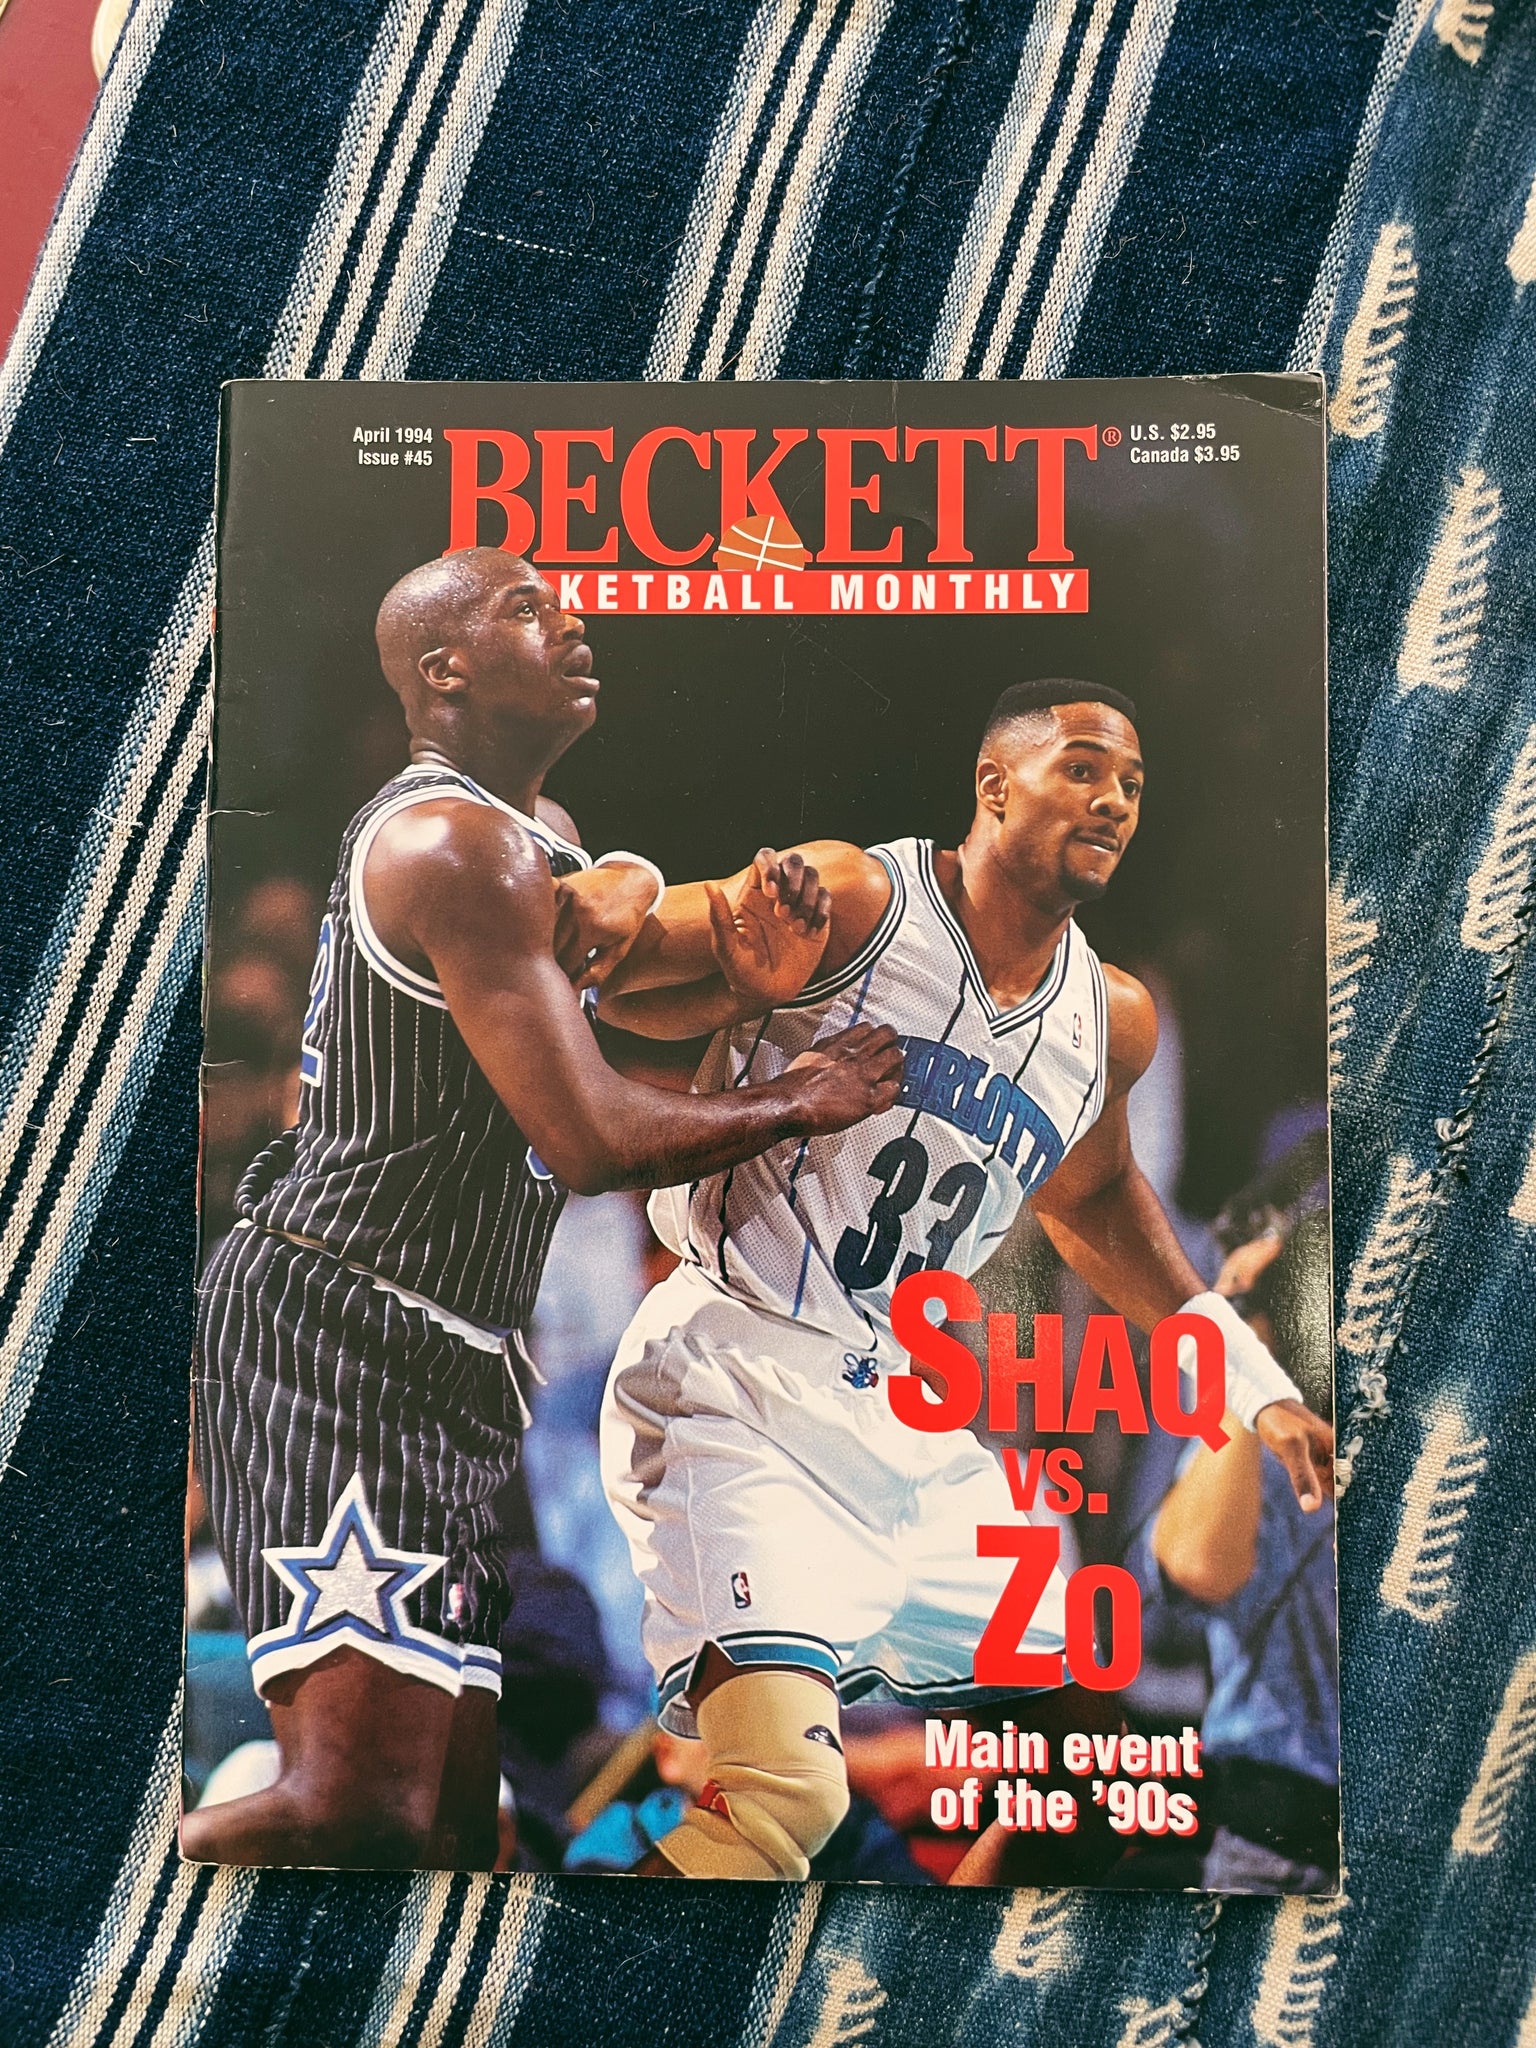 Vintage Assorted Shaquille O’Neal Magazines (Please Select)